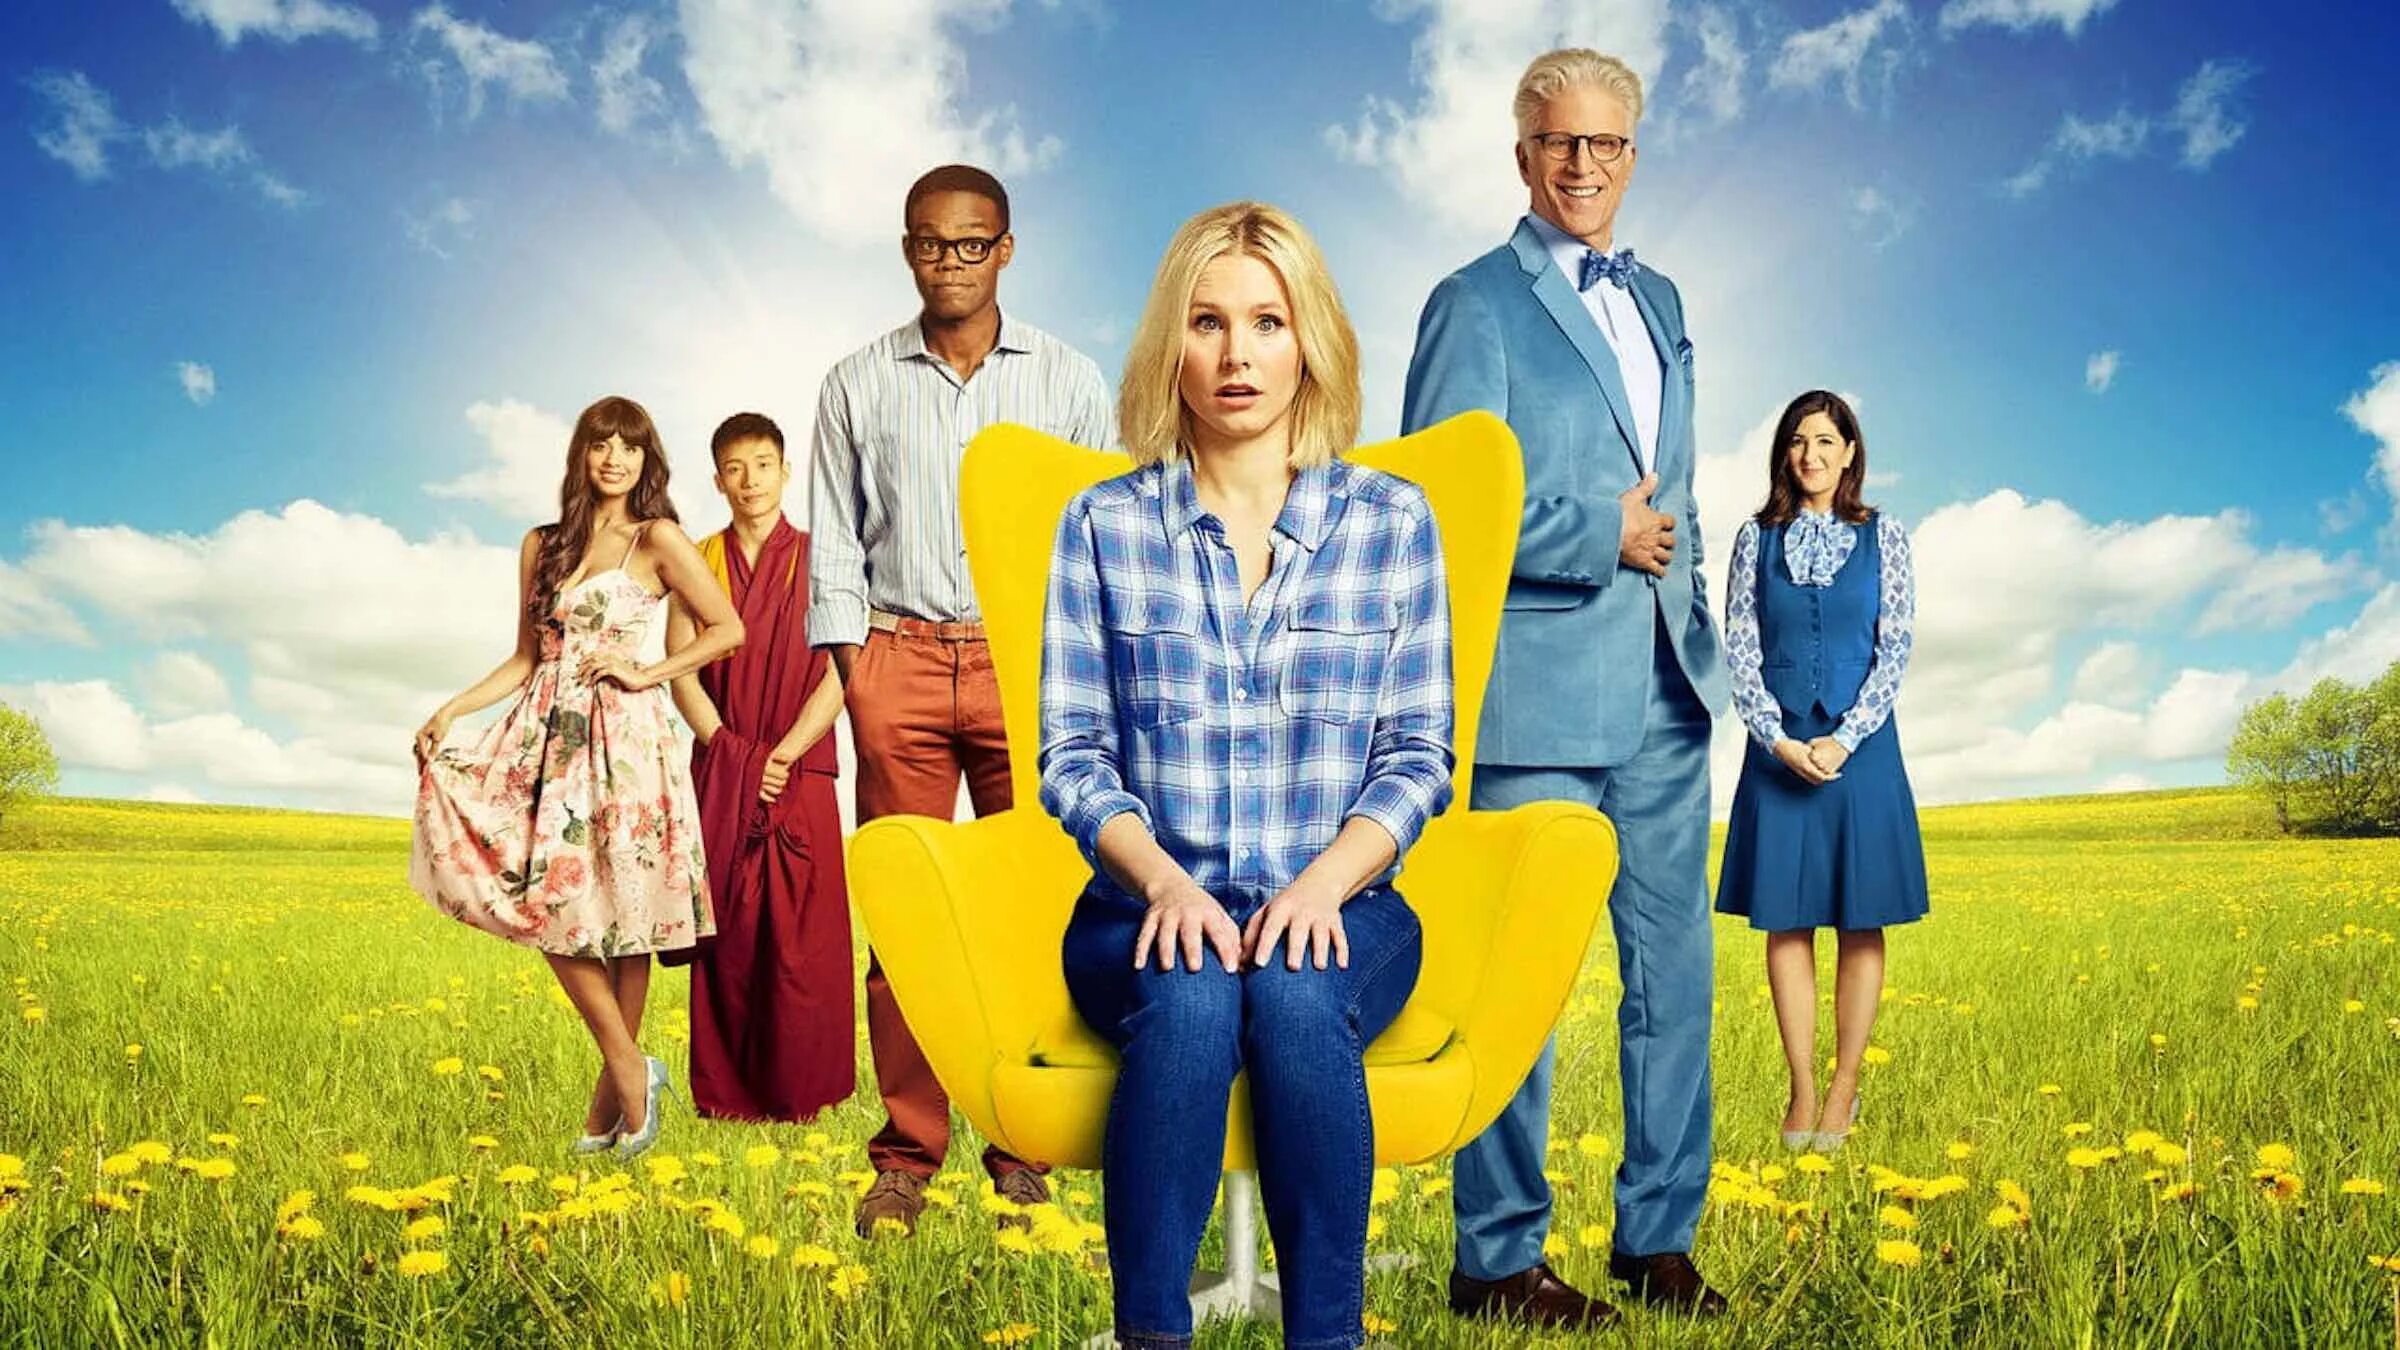 My good place. The good place Постер.